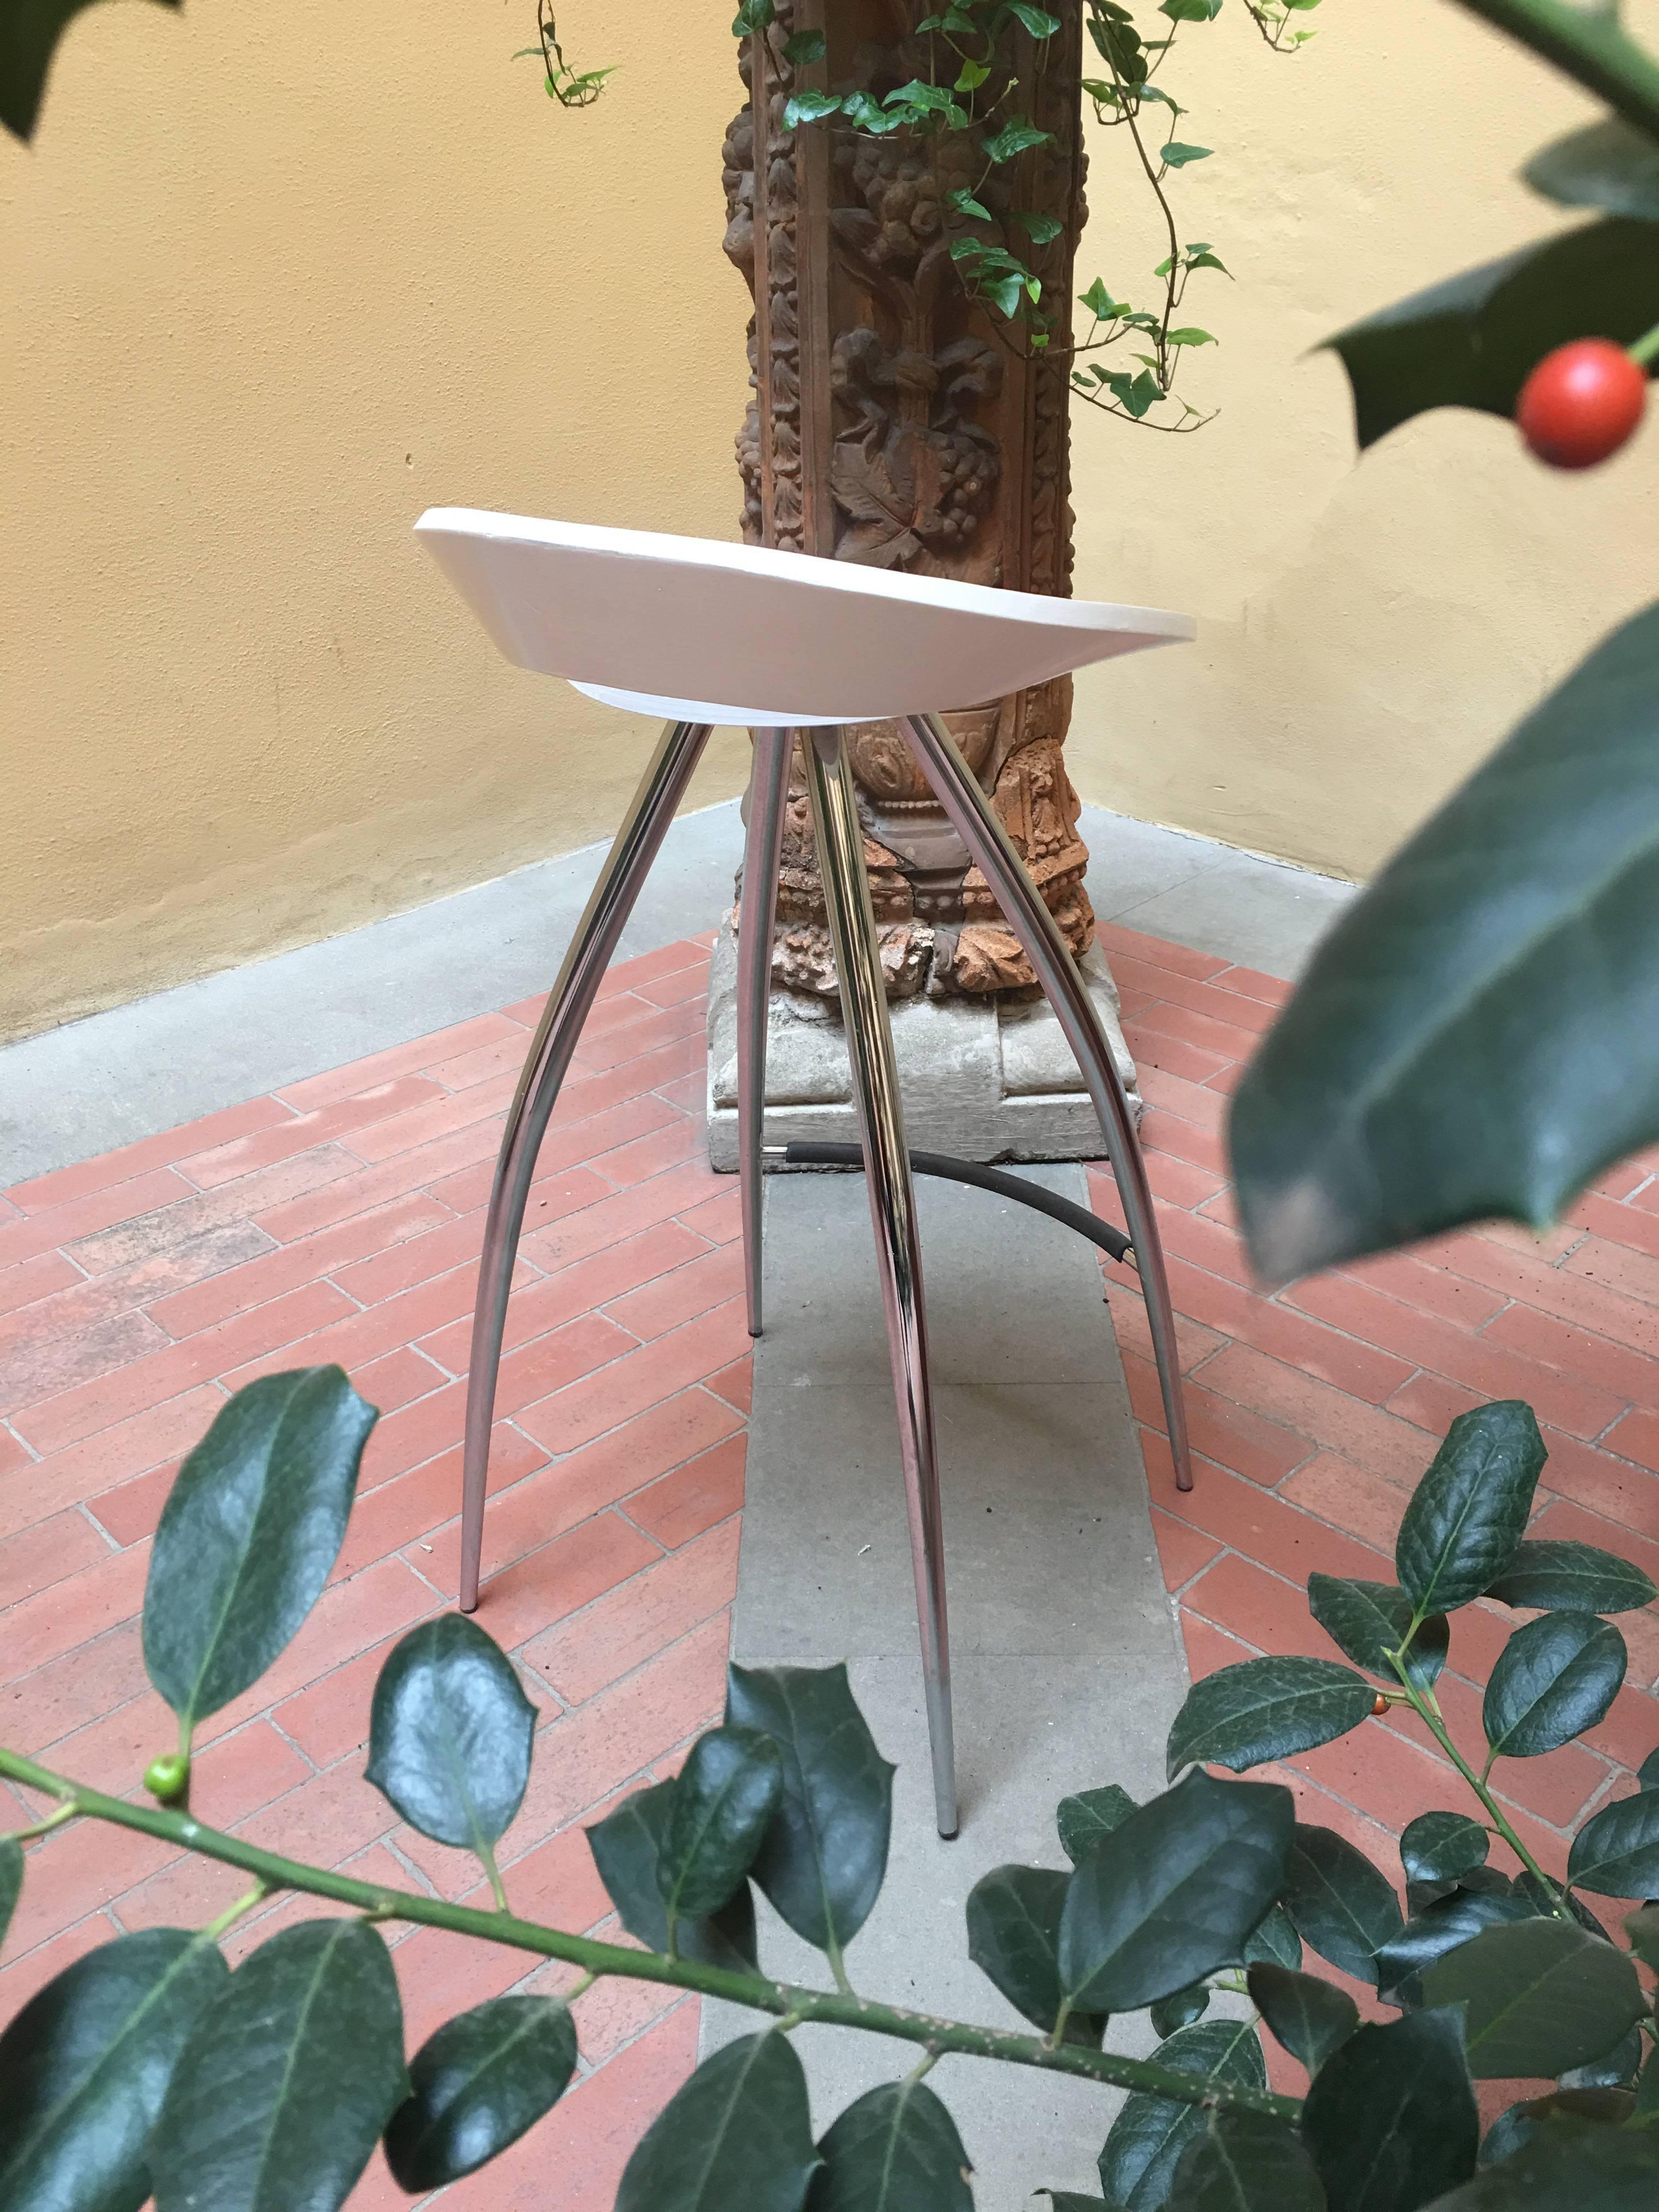 Designed by Design Group Italia for Magis, 1994.

Magis Lyra stool

Designed by the Milan firm Design Group Italia, the Lyra stool owes a lot to the way Charles Eames used bentwood. You can see the influence in the graceful molding of the